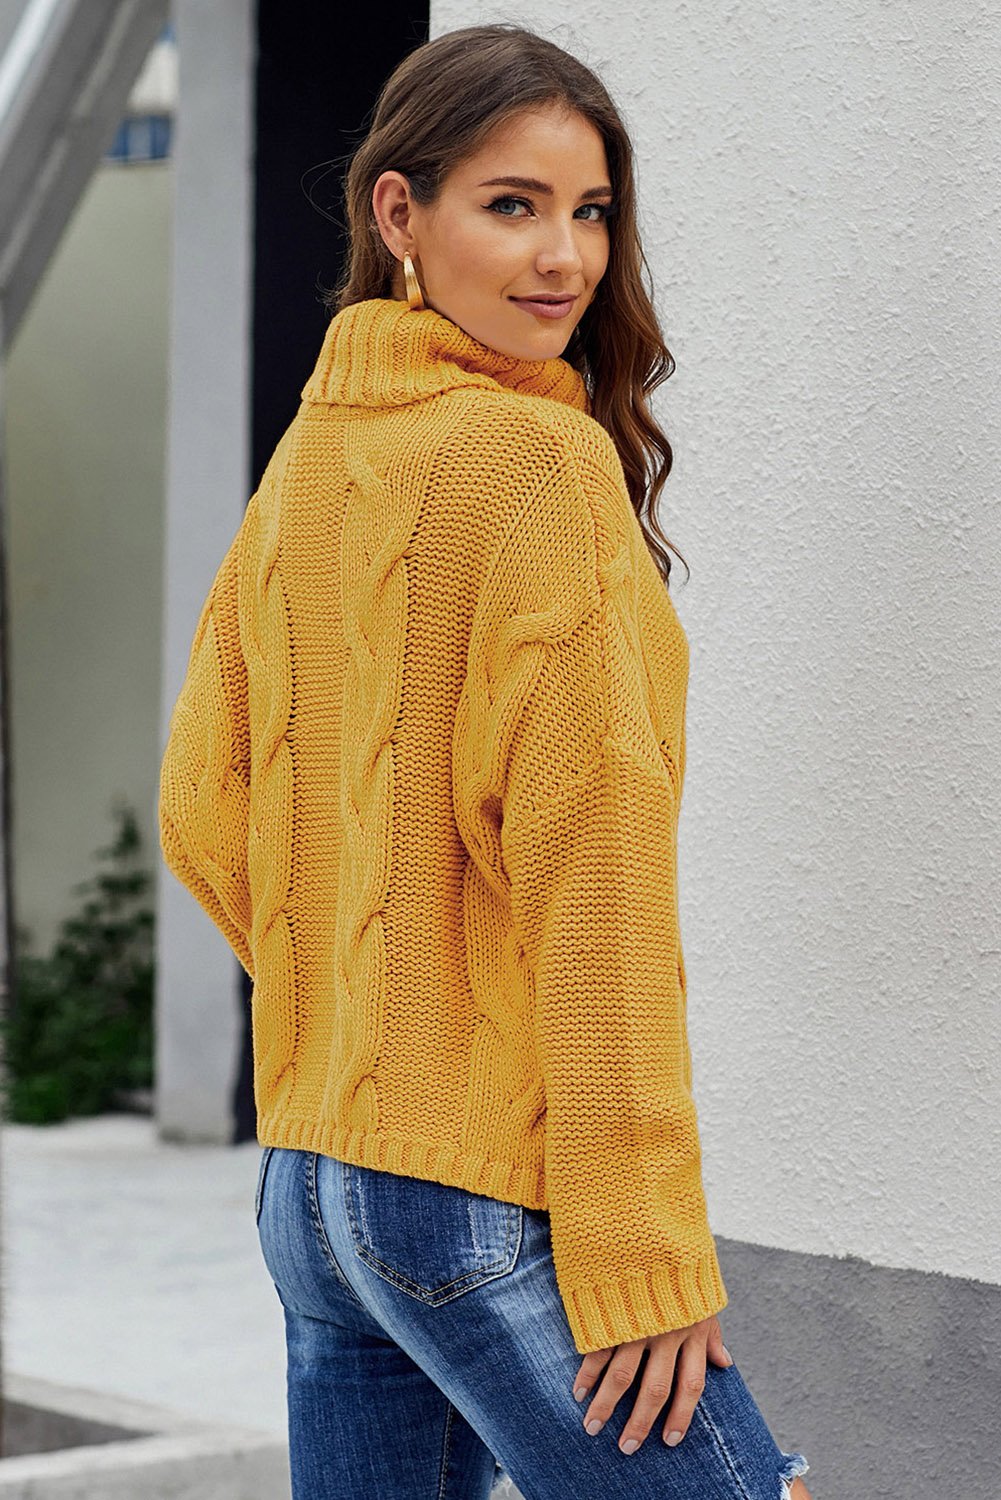 Picture of a Women's Cuddle Approved Cable Knit Handmade Turtleneck Sweater yellow side